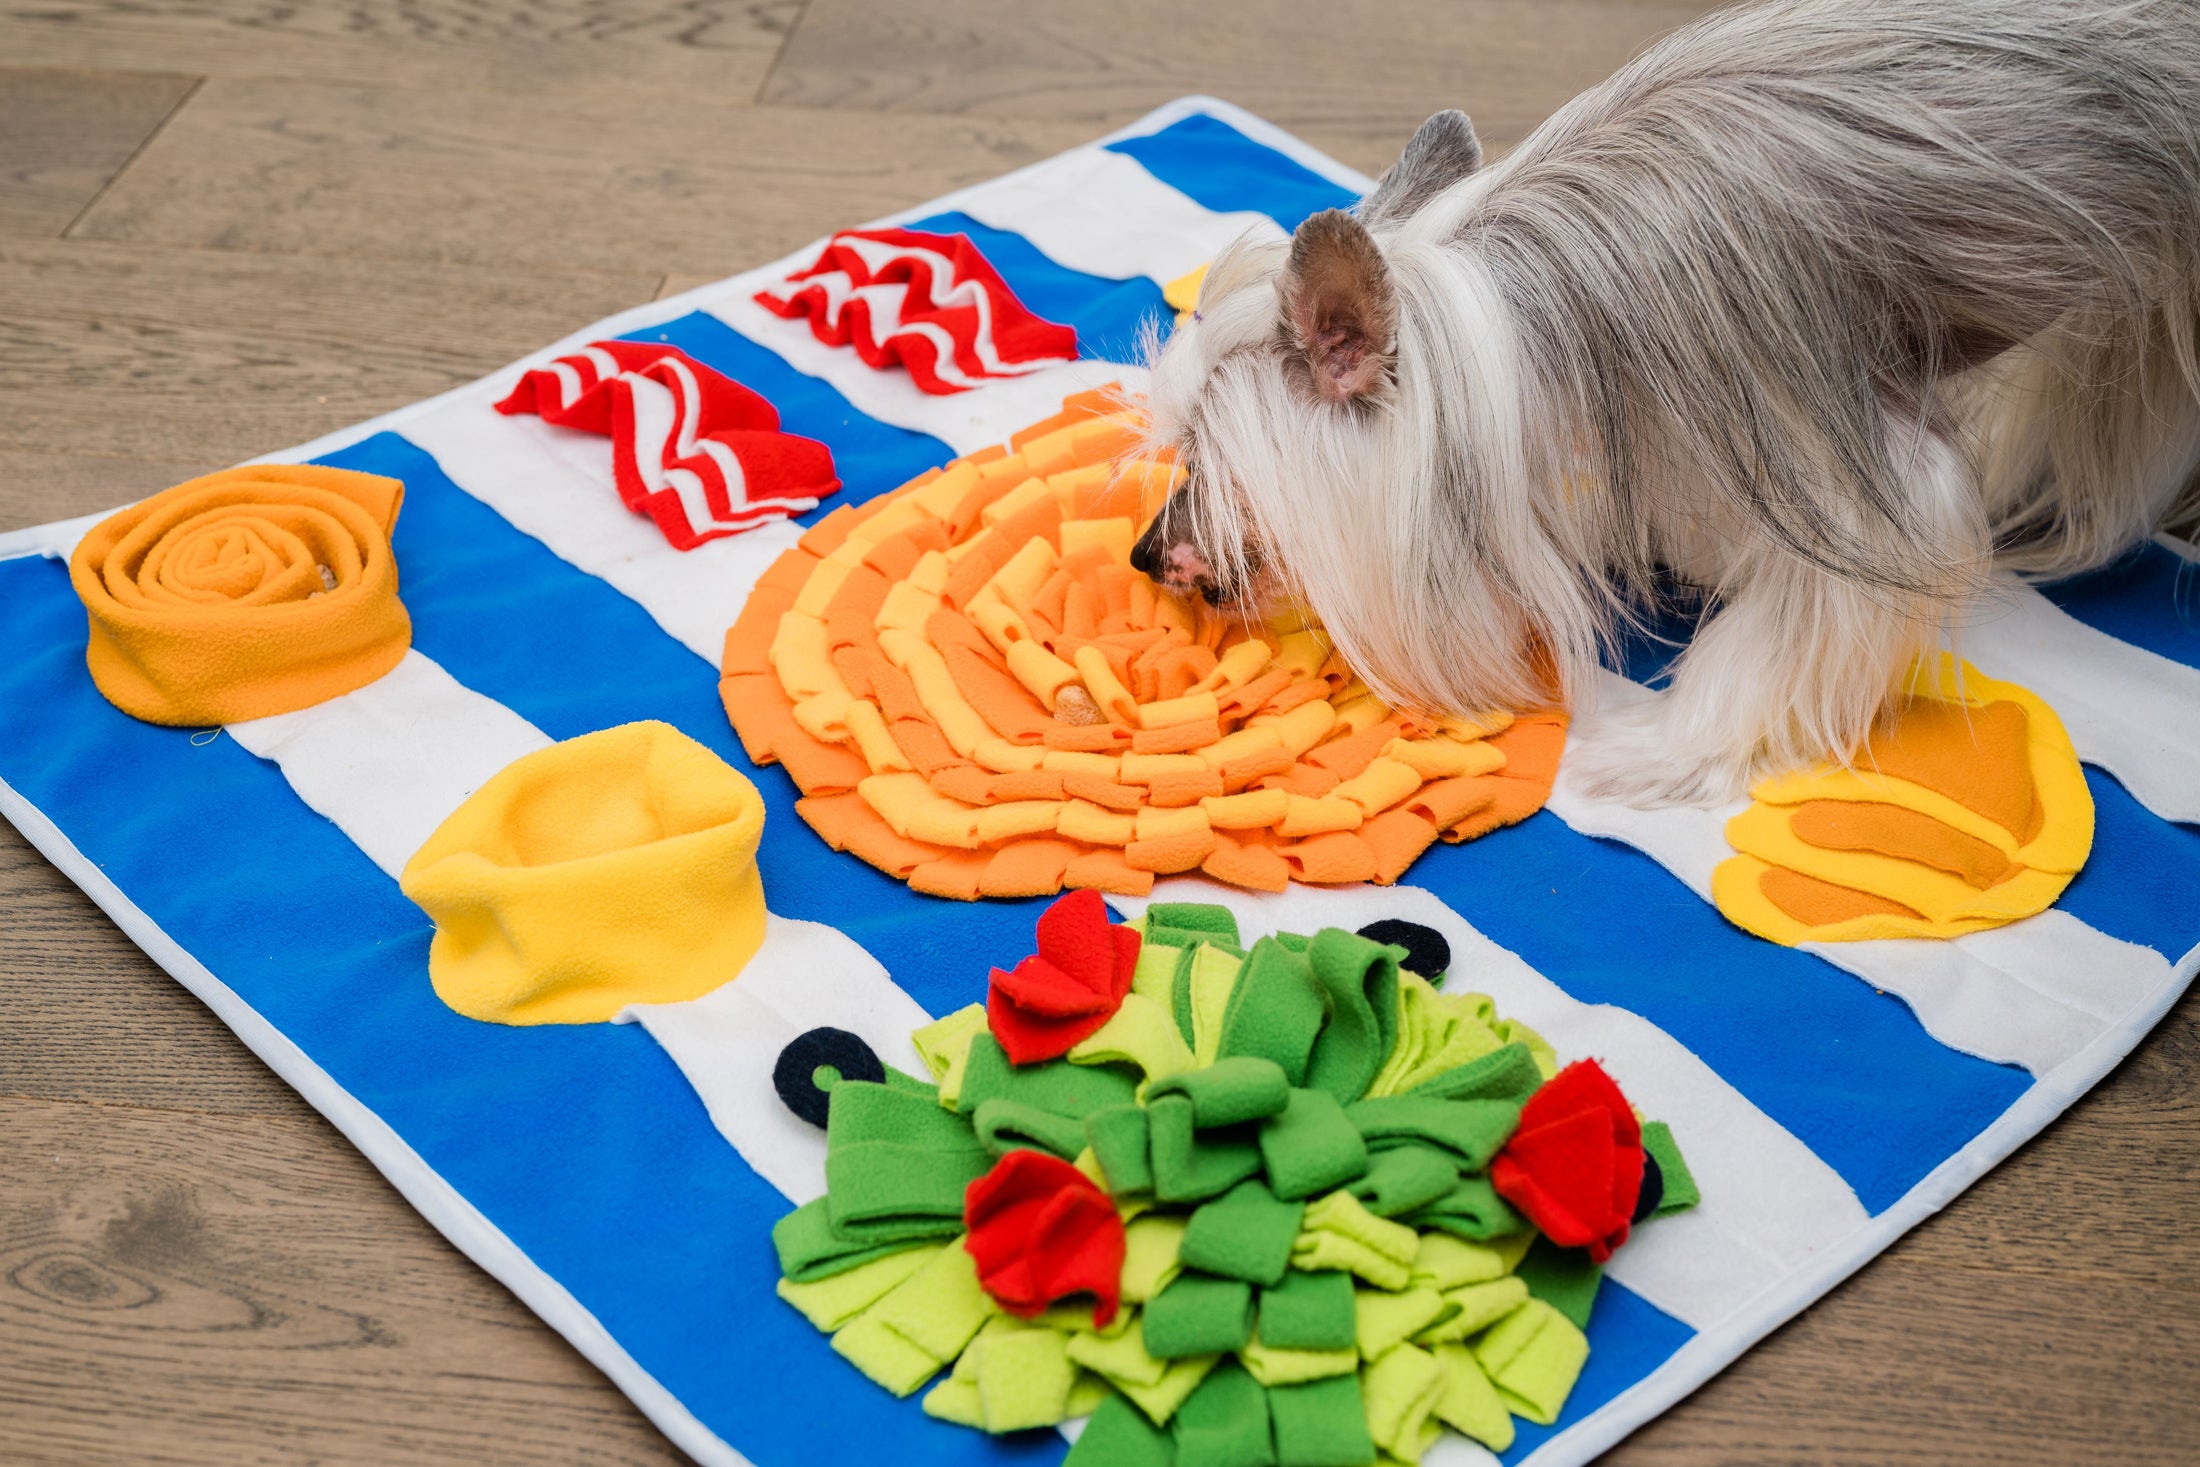 Snuffle Mat for Dogs - Dog Enrichment Toys, 16.2'' X 21''Dog